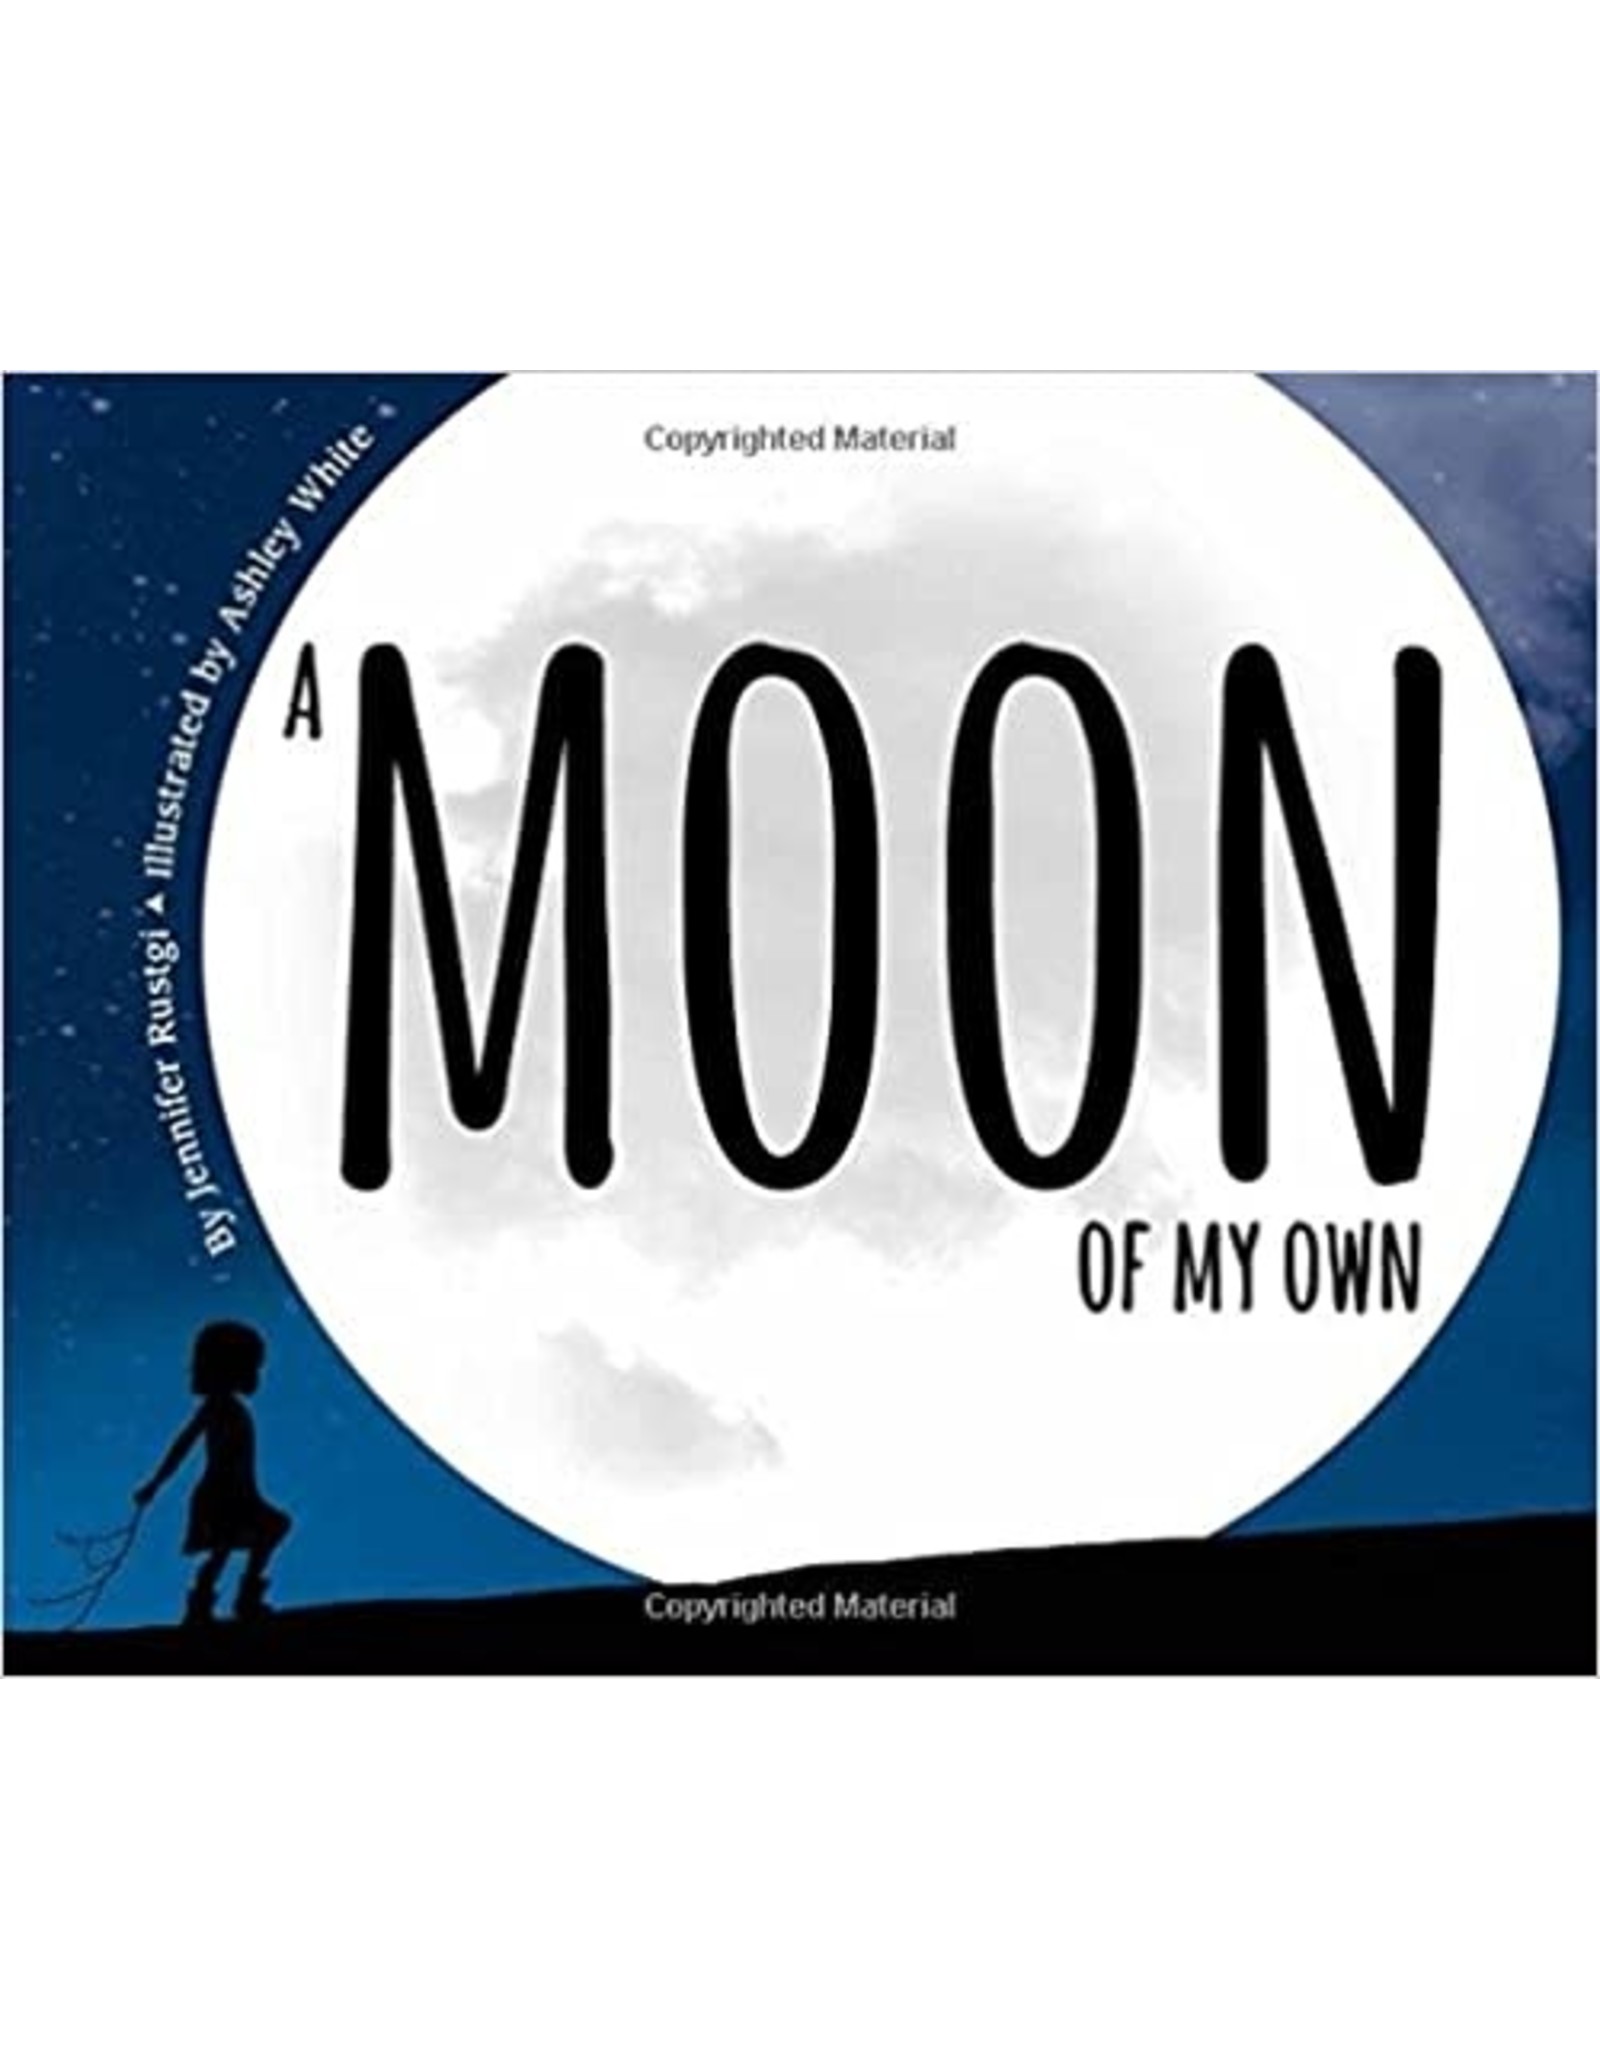 A Moon of My Own: A World Travel Book for Kids (Includes an Introduction to World Geography and the Phases of the Moon)